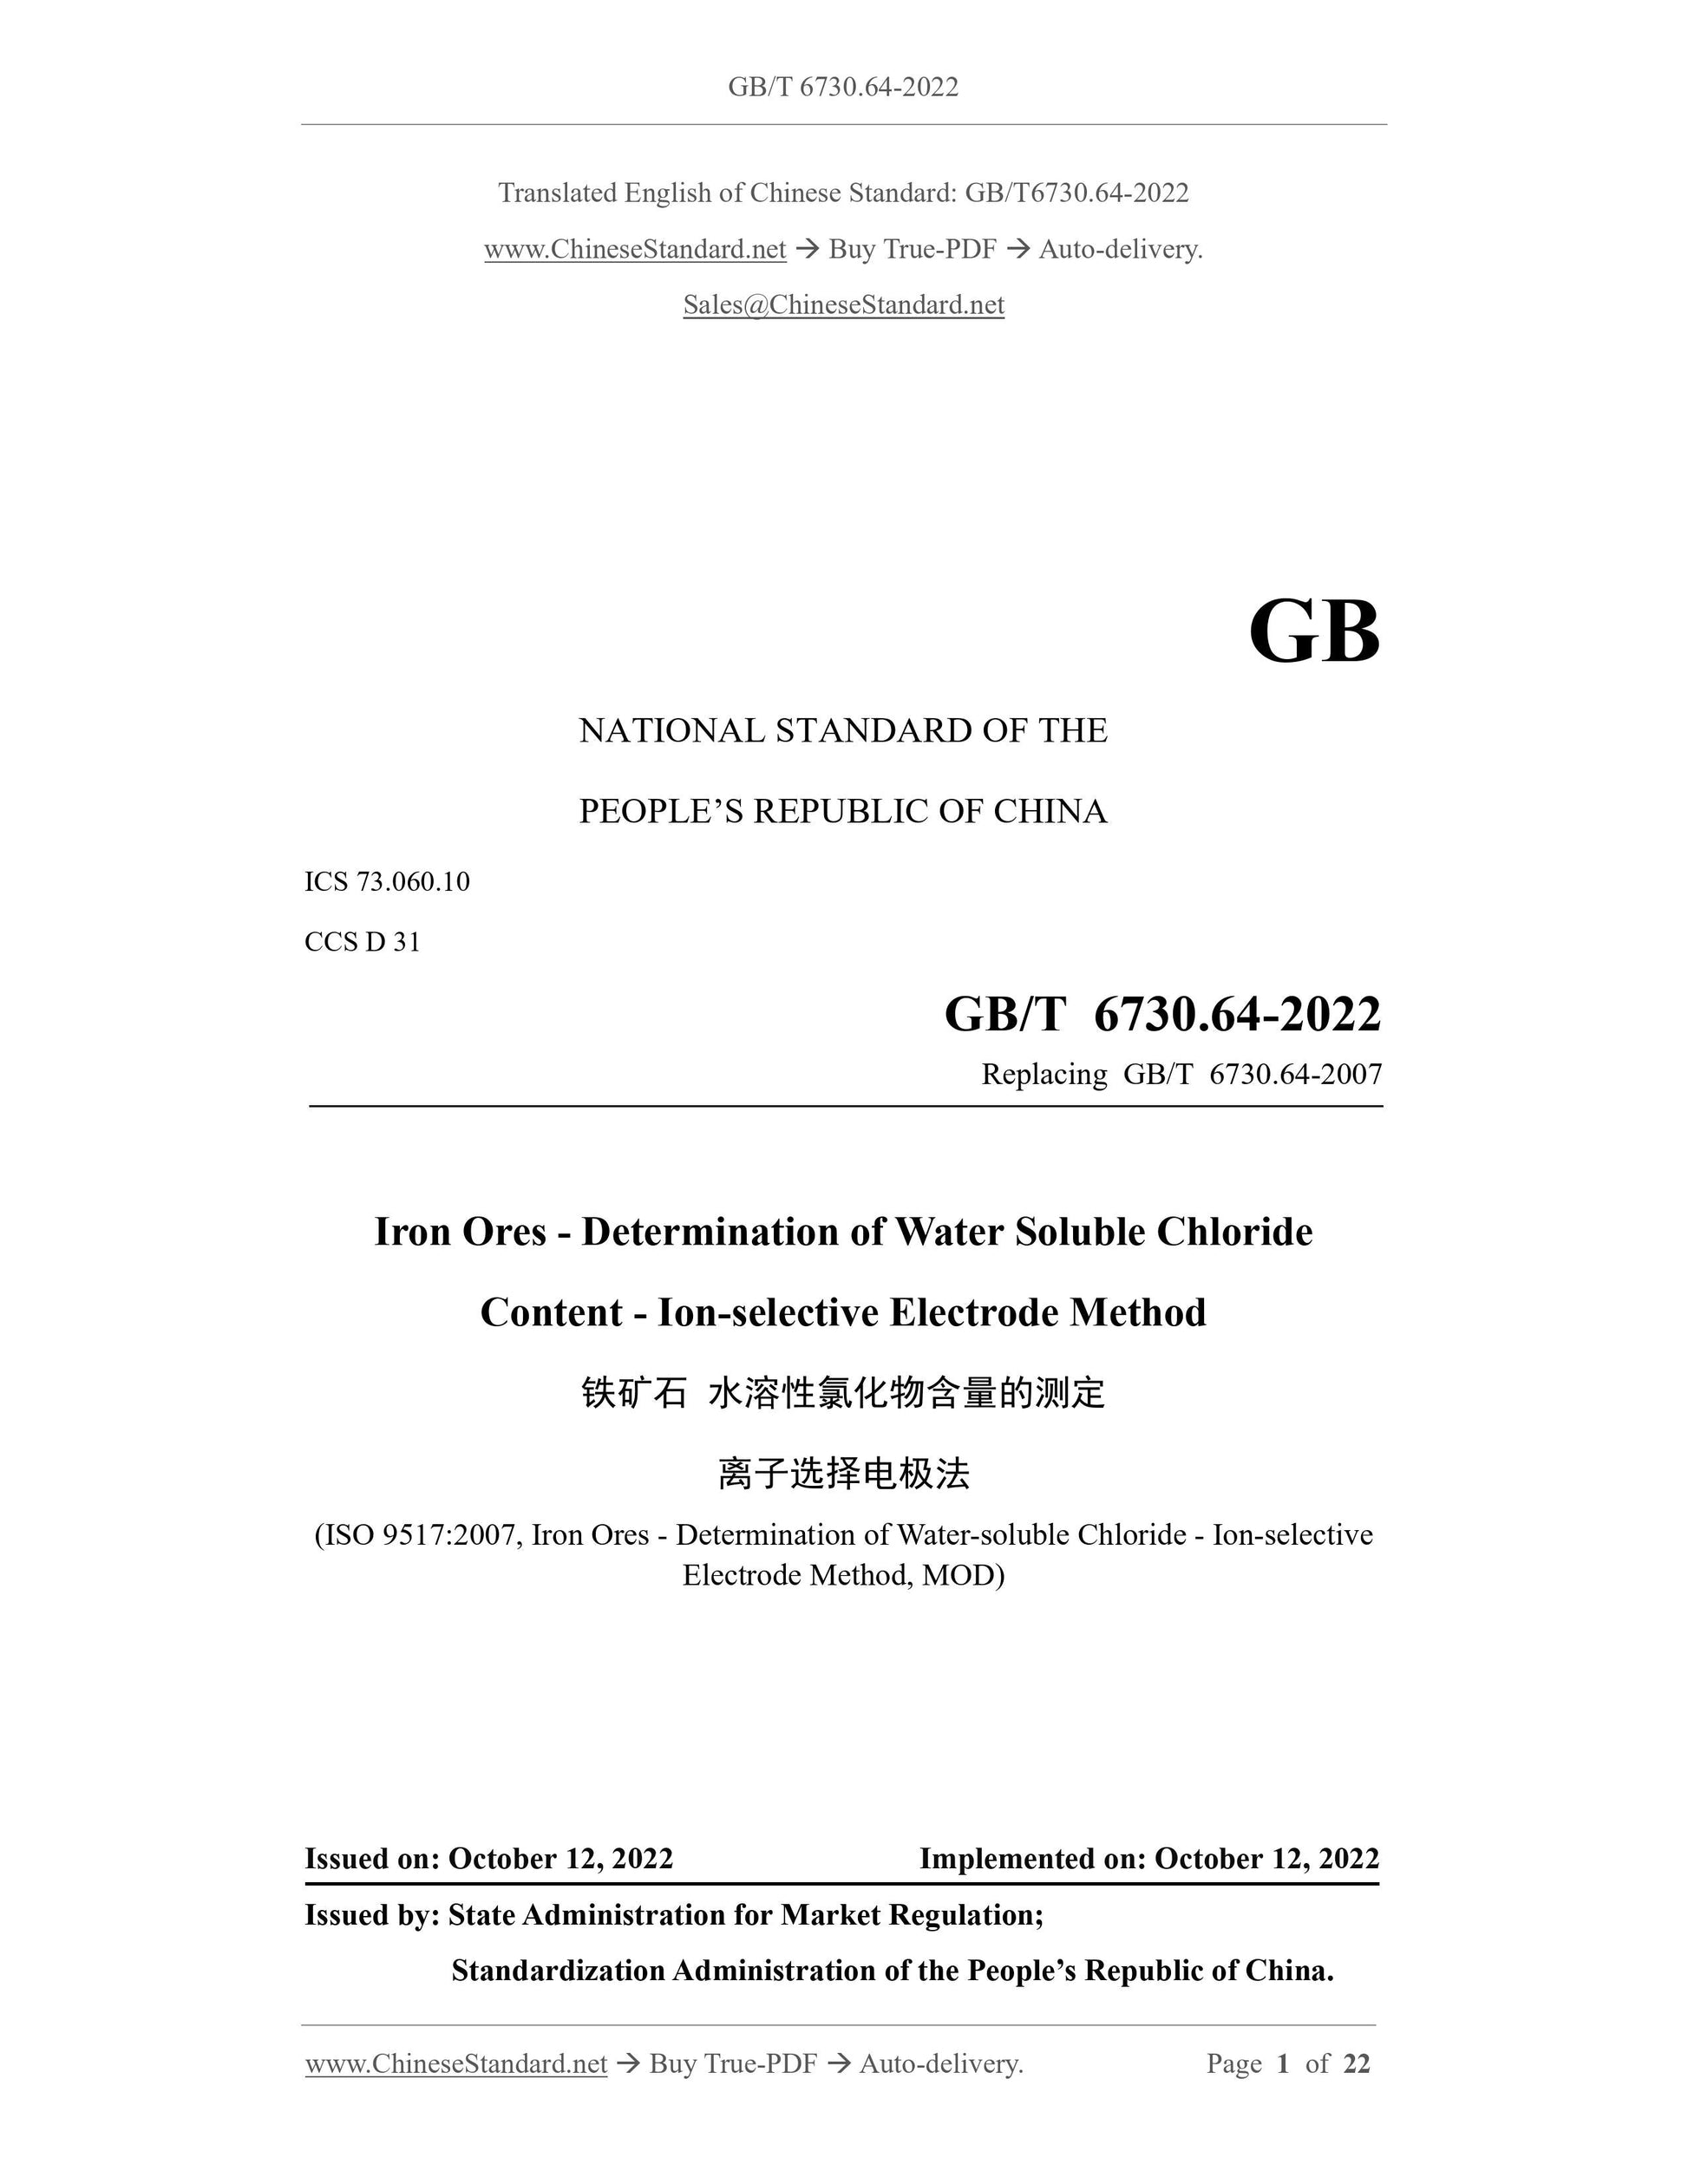 GB/T 6730.64-2022 Page 1